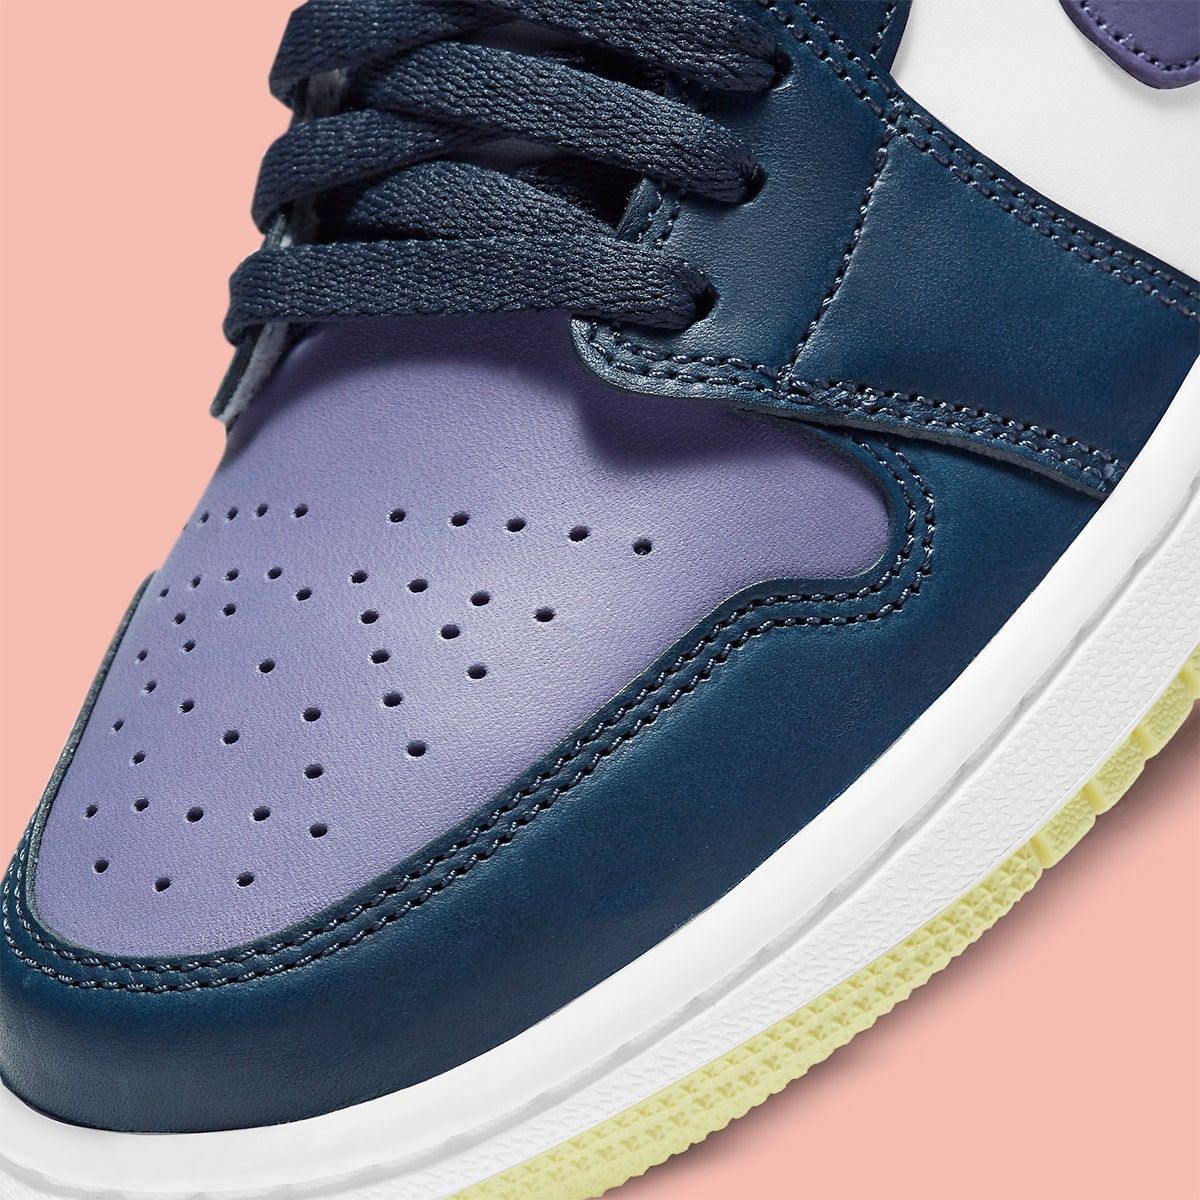 The Air Jordan 1 Low Appears with Mismatched Muted Hues | HOUSE OF HEAT